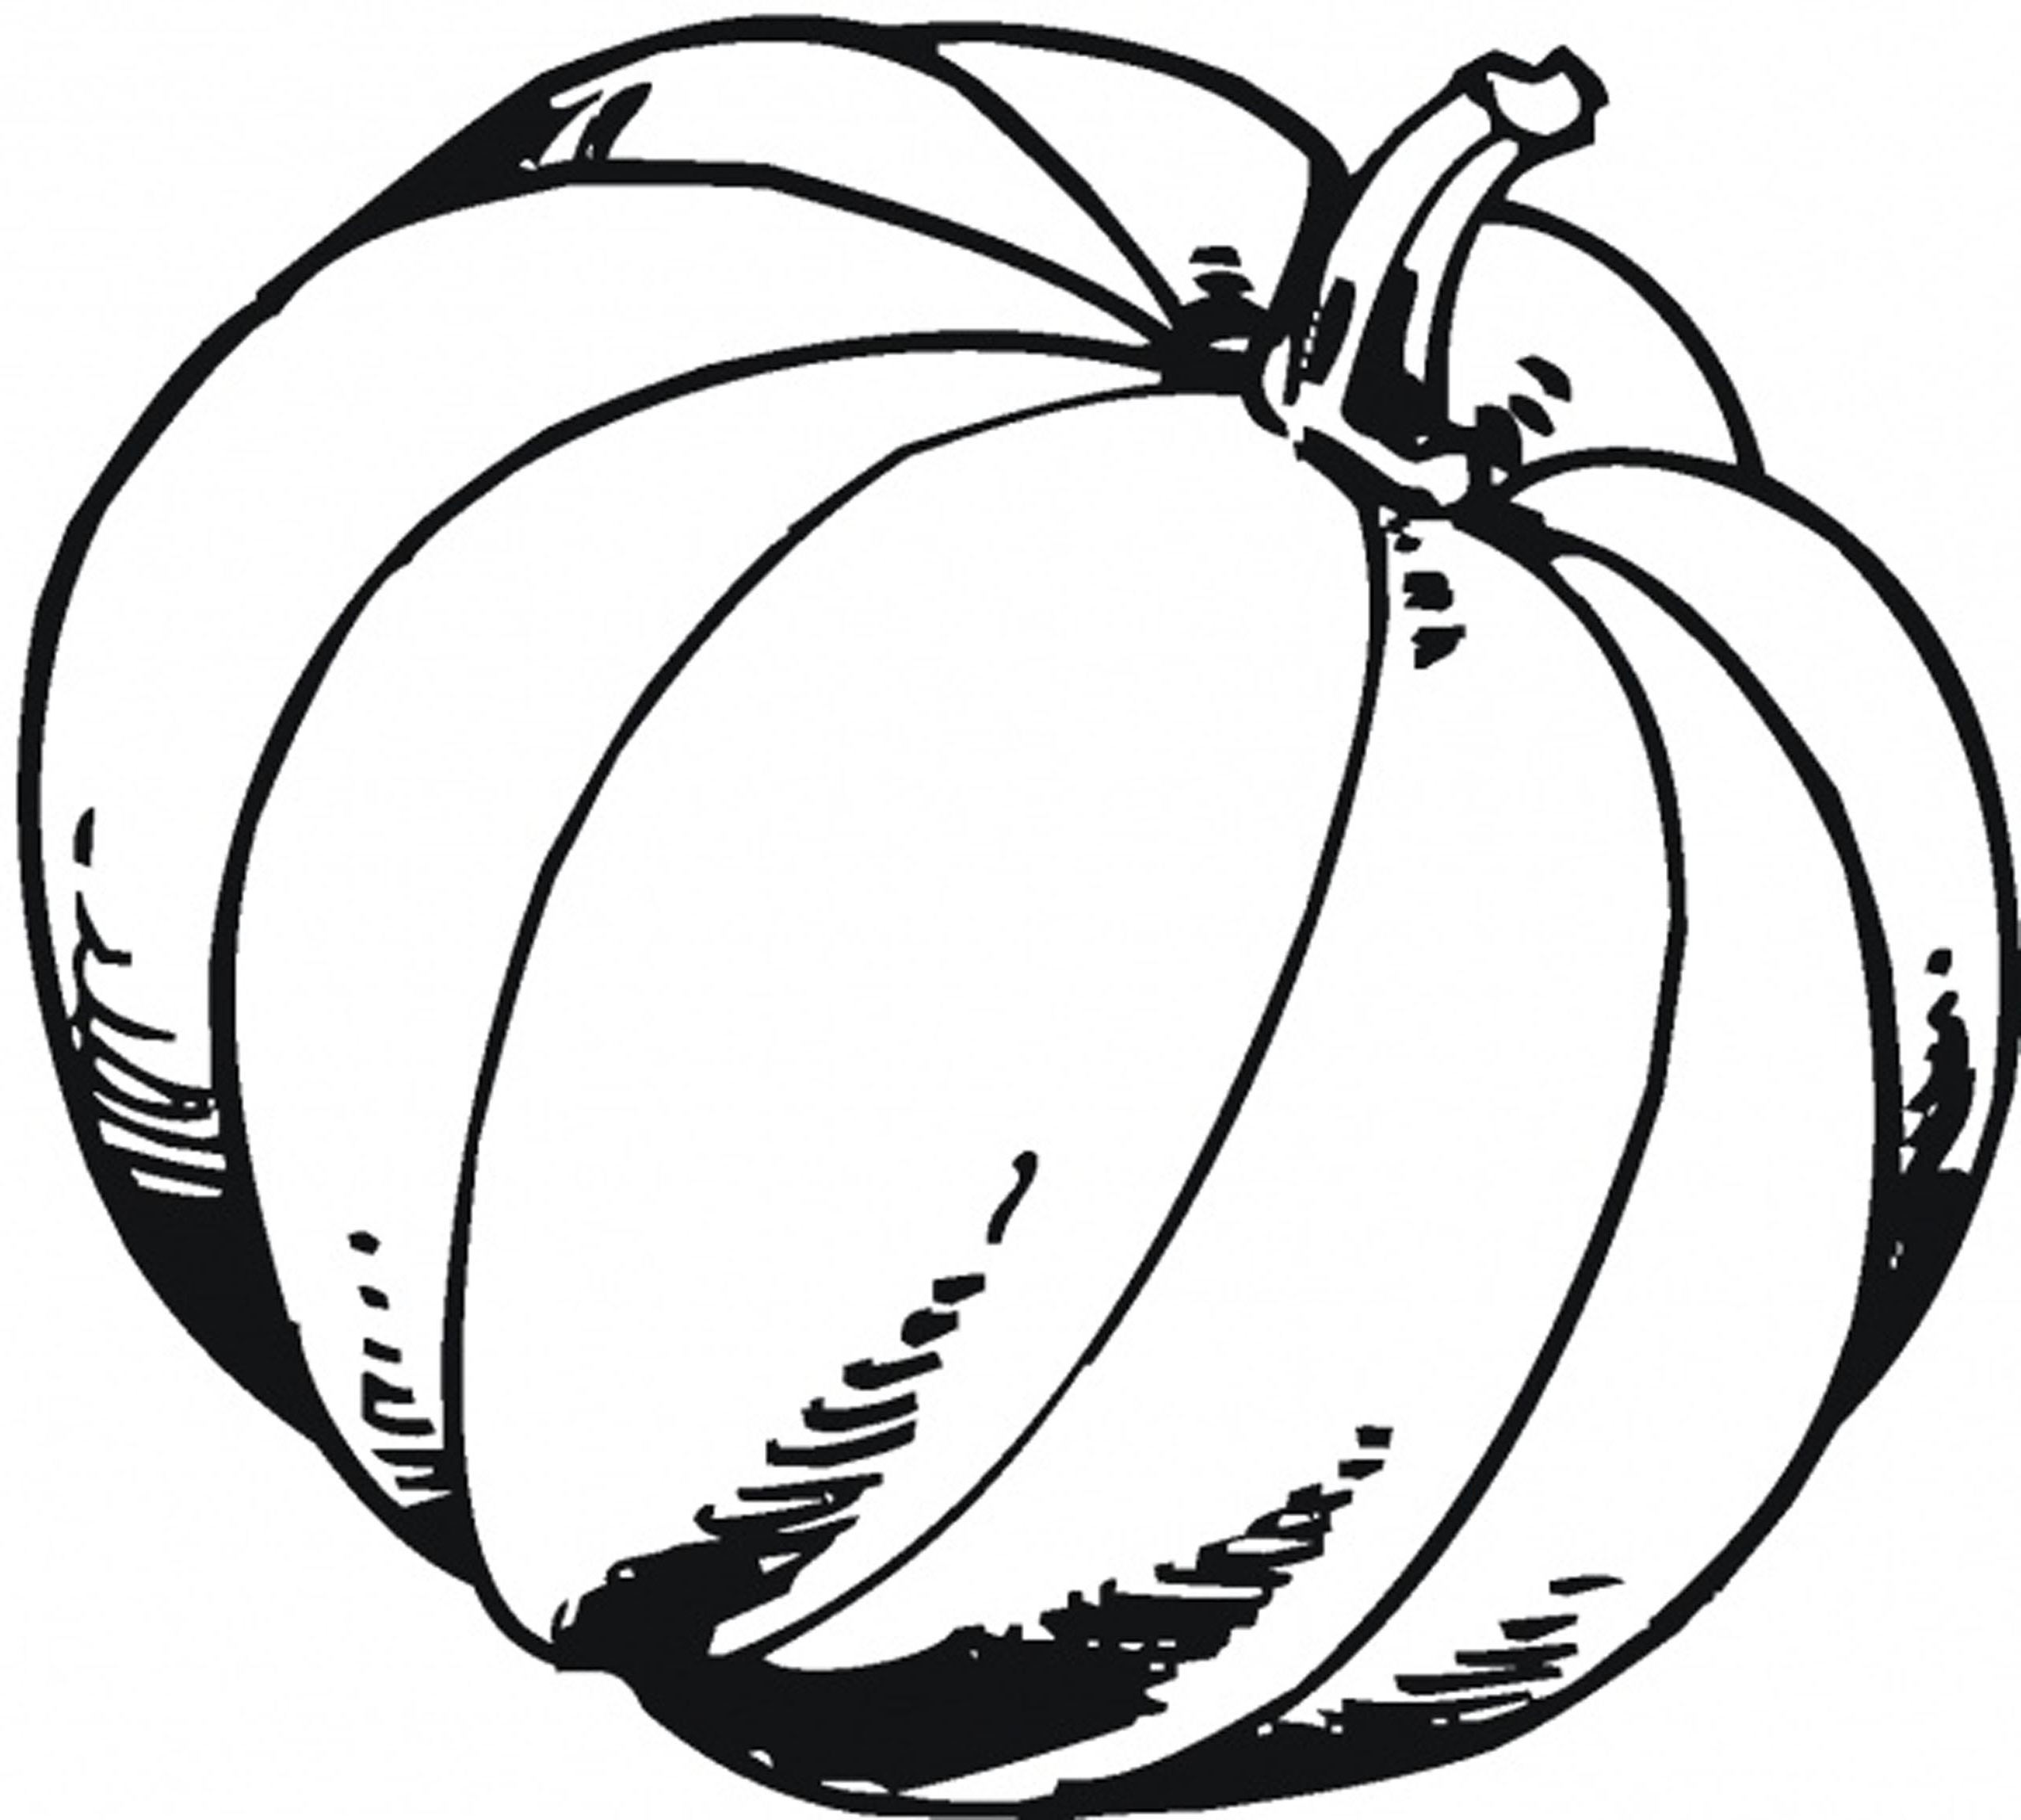 pumpkin-patch-coloring-pages-free-download-on-clipartmag